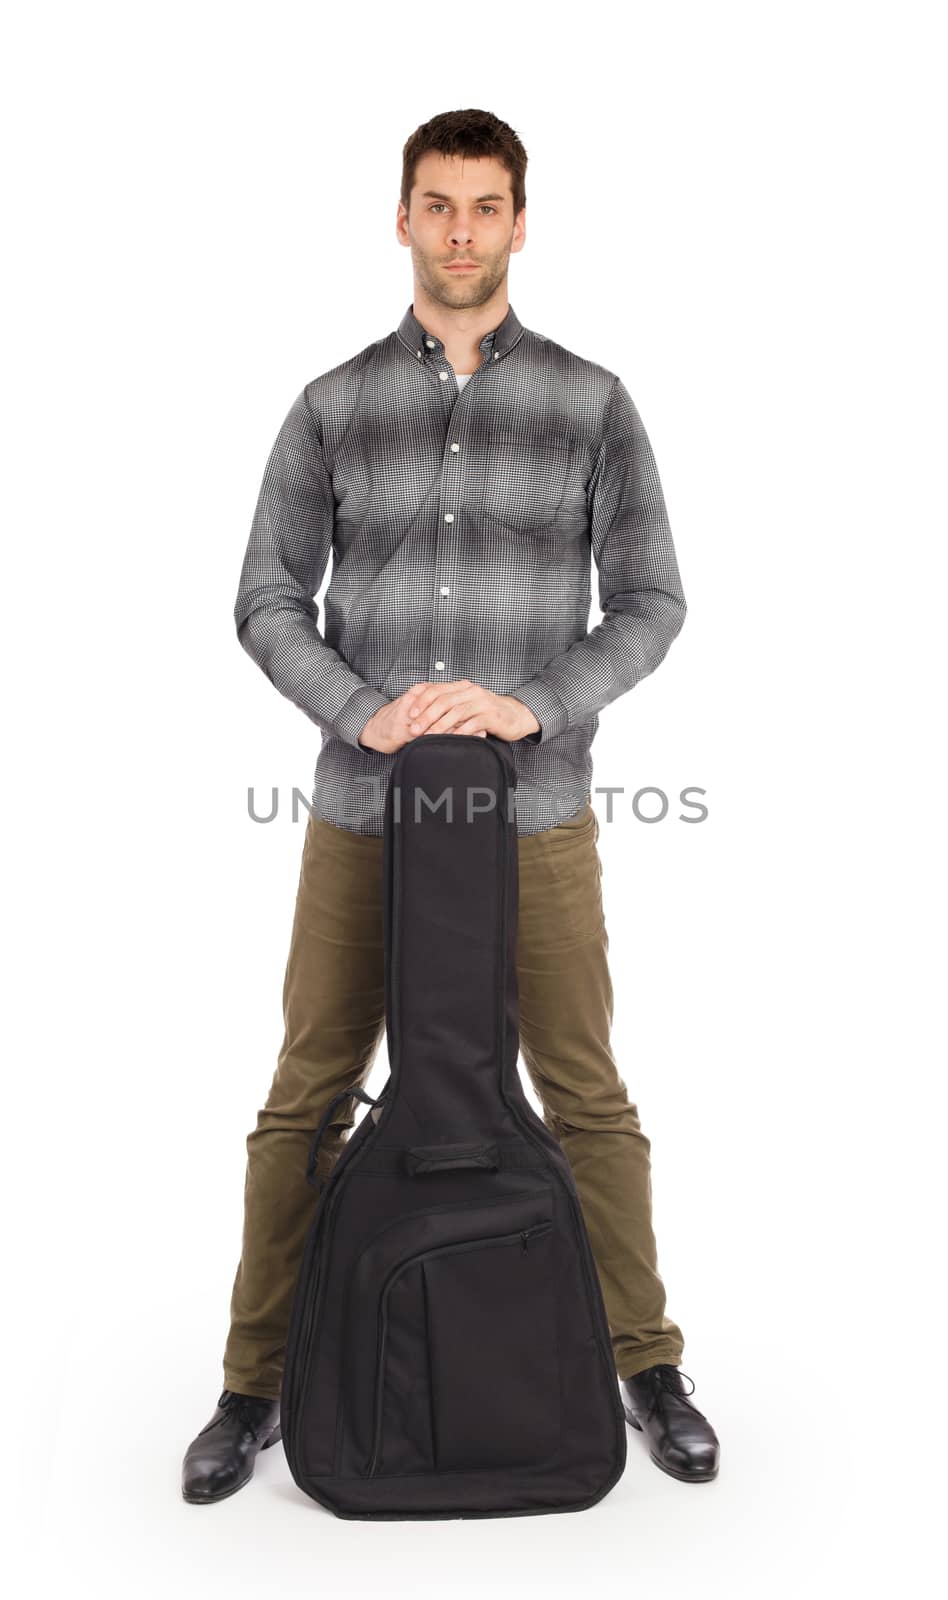 Musican with acoustic guitar in bag by michaklootwijk